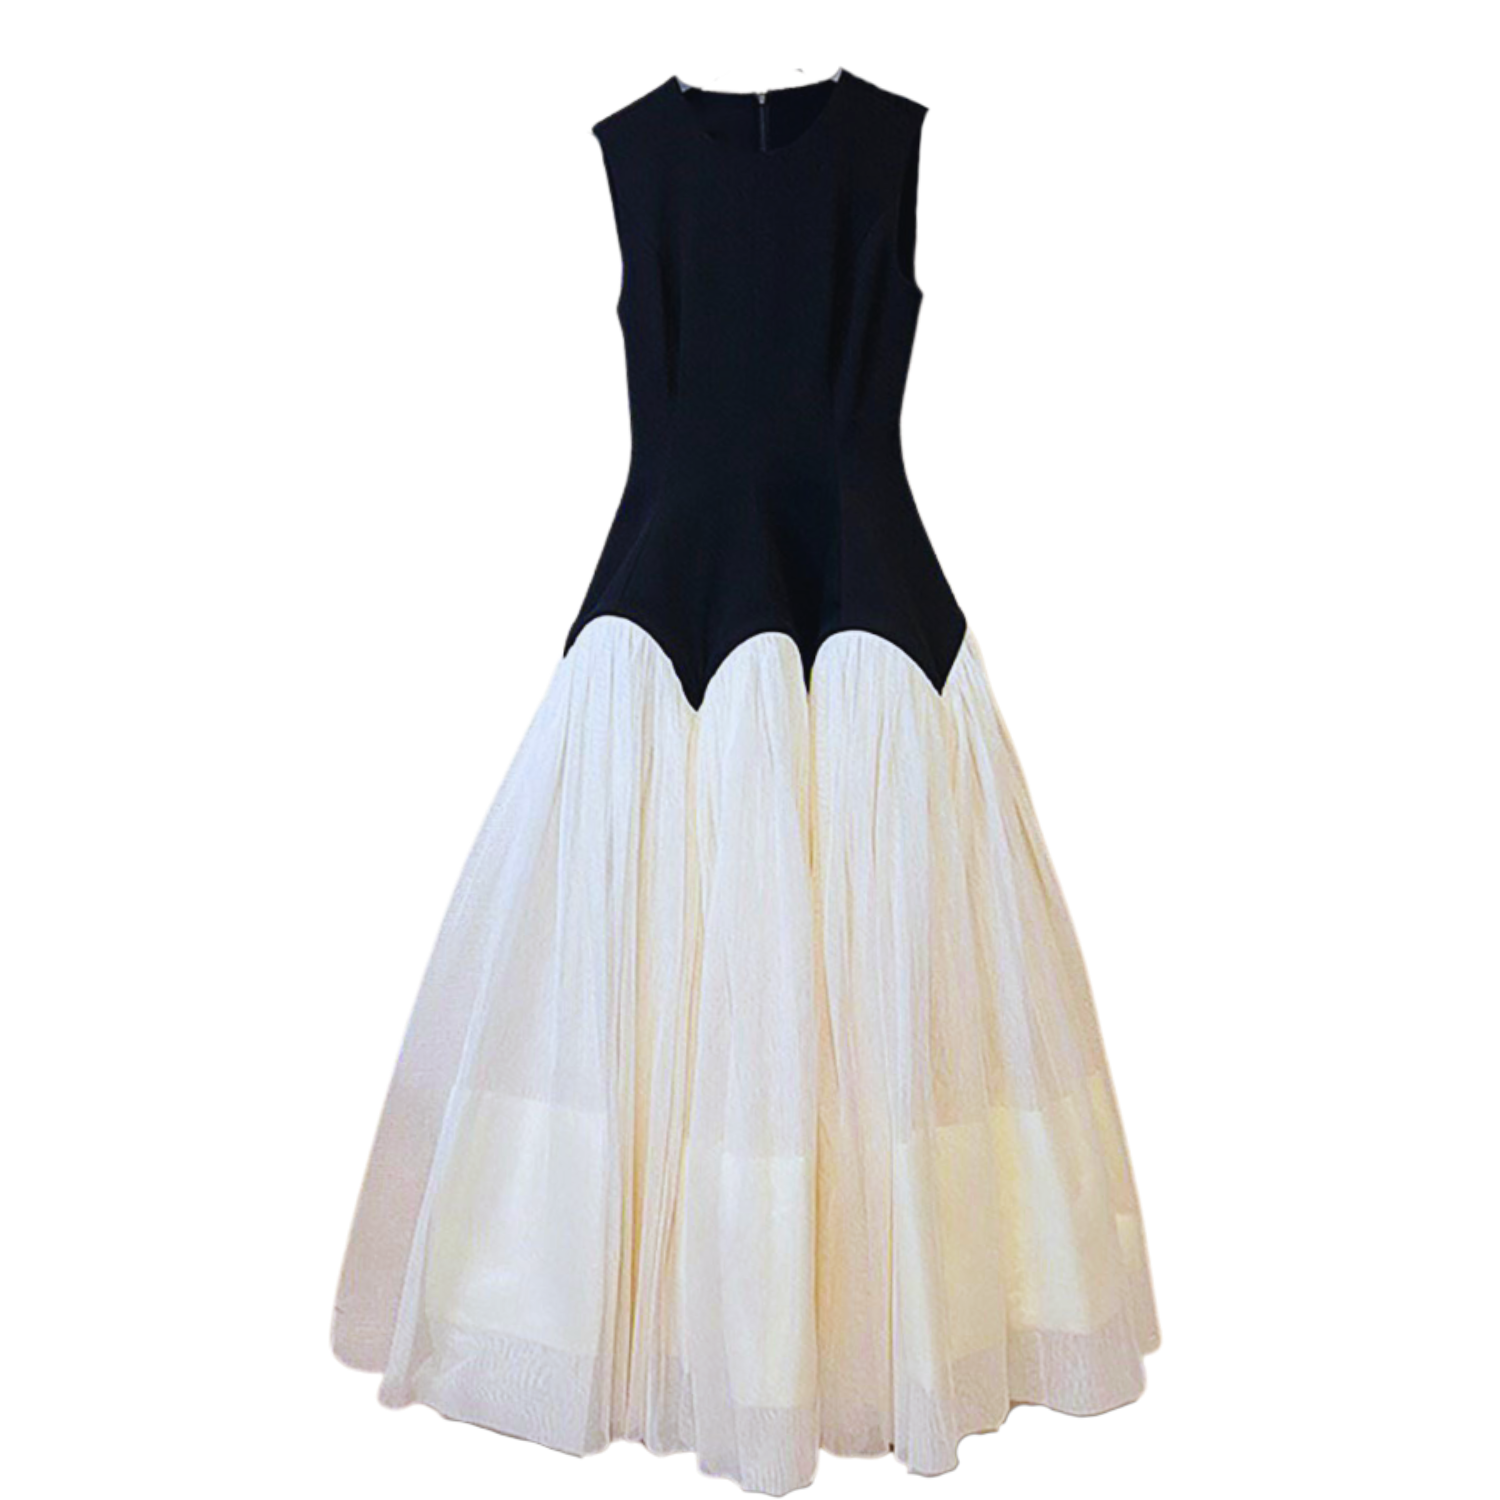 Black and Cream Sleeveless Dress with a Tulle Skirt